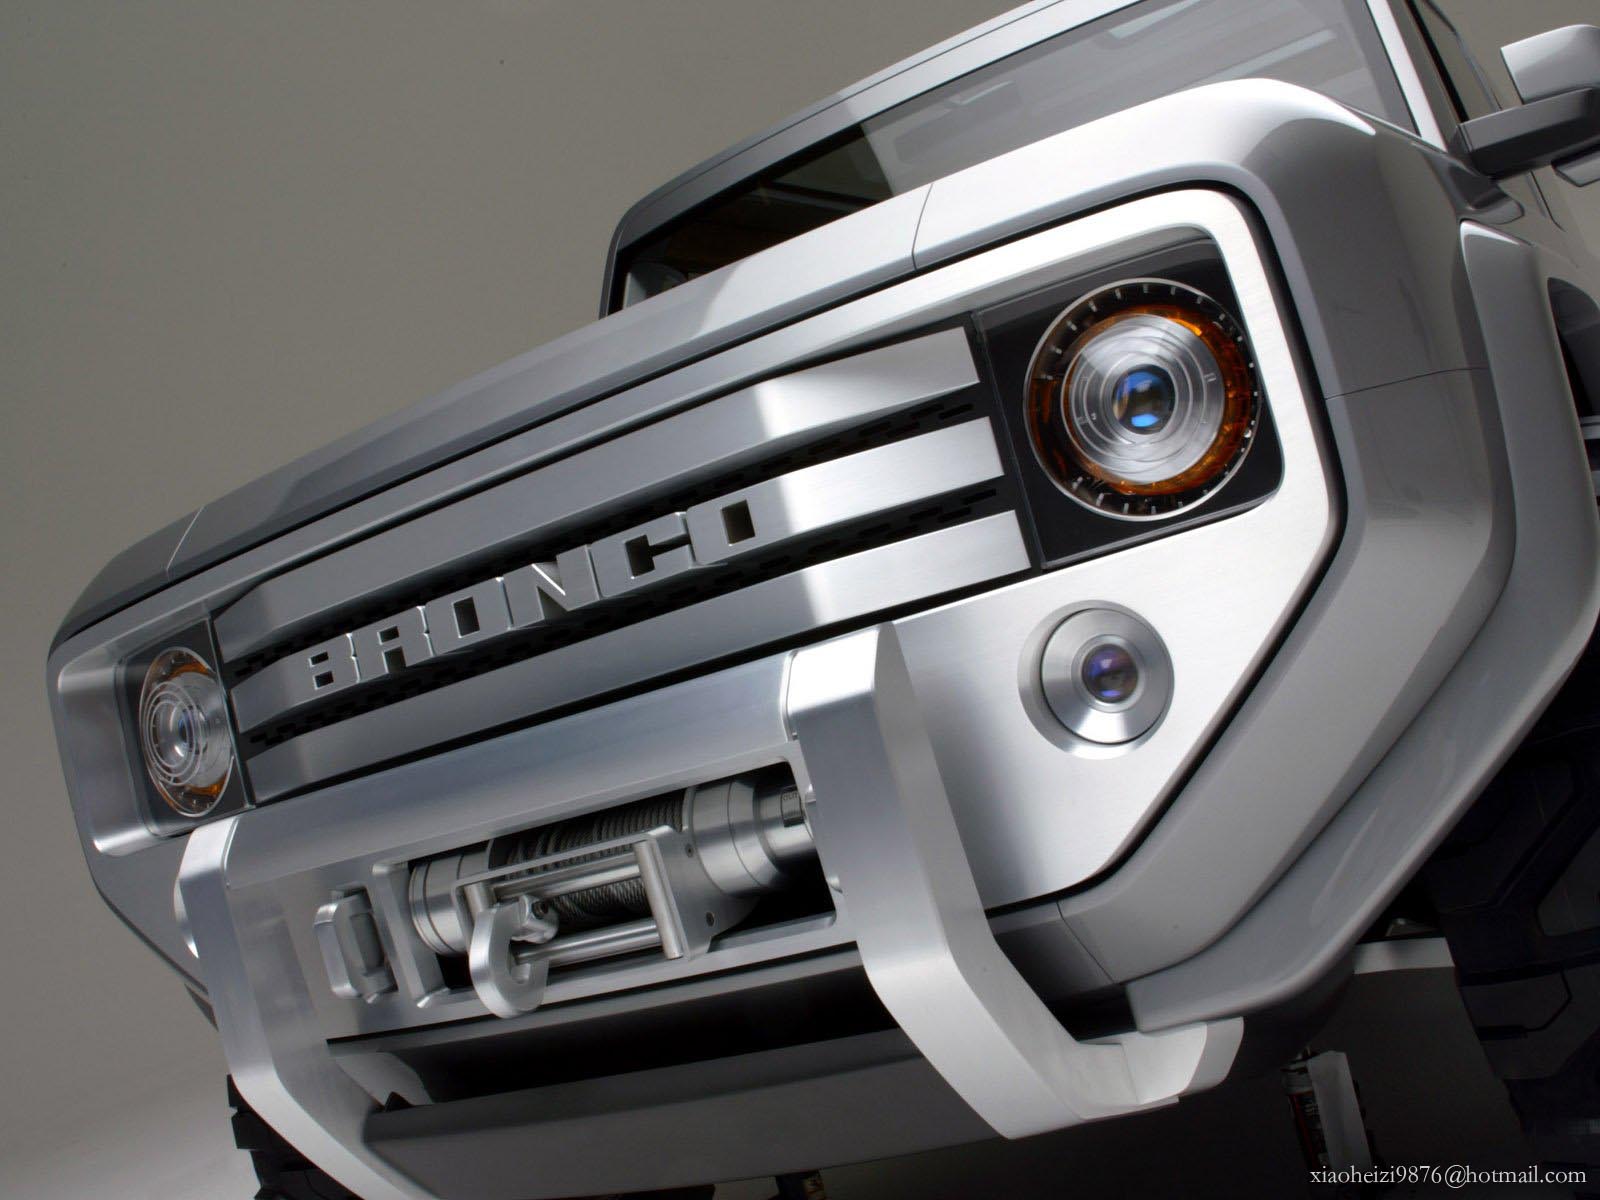 Ford Bronco Concept Photo Gallery 69